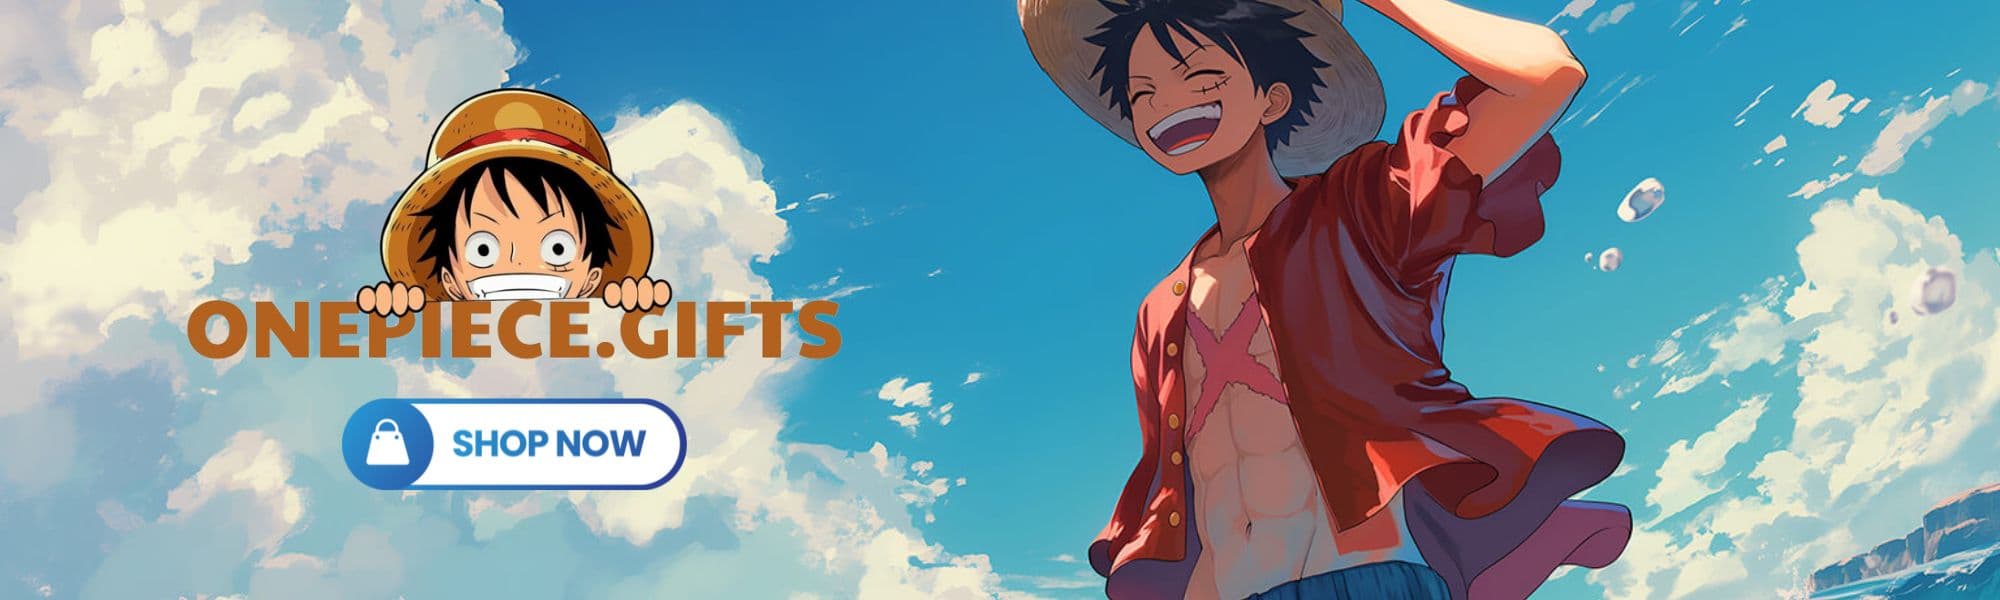 One Piece Gifts Banner